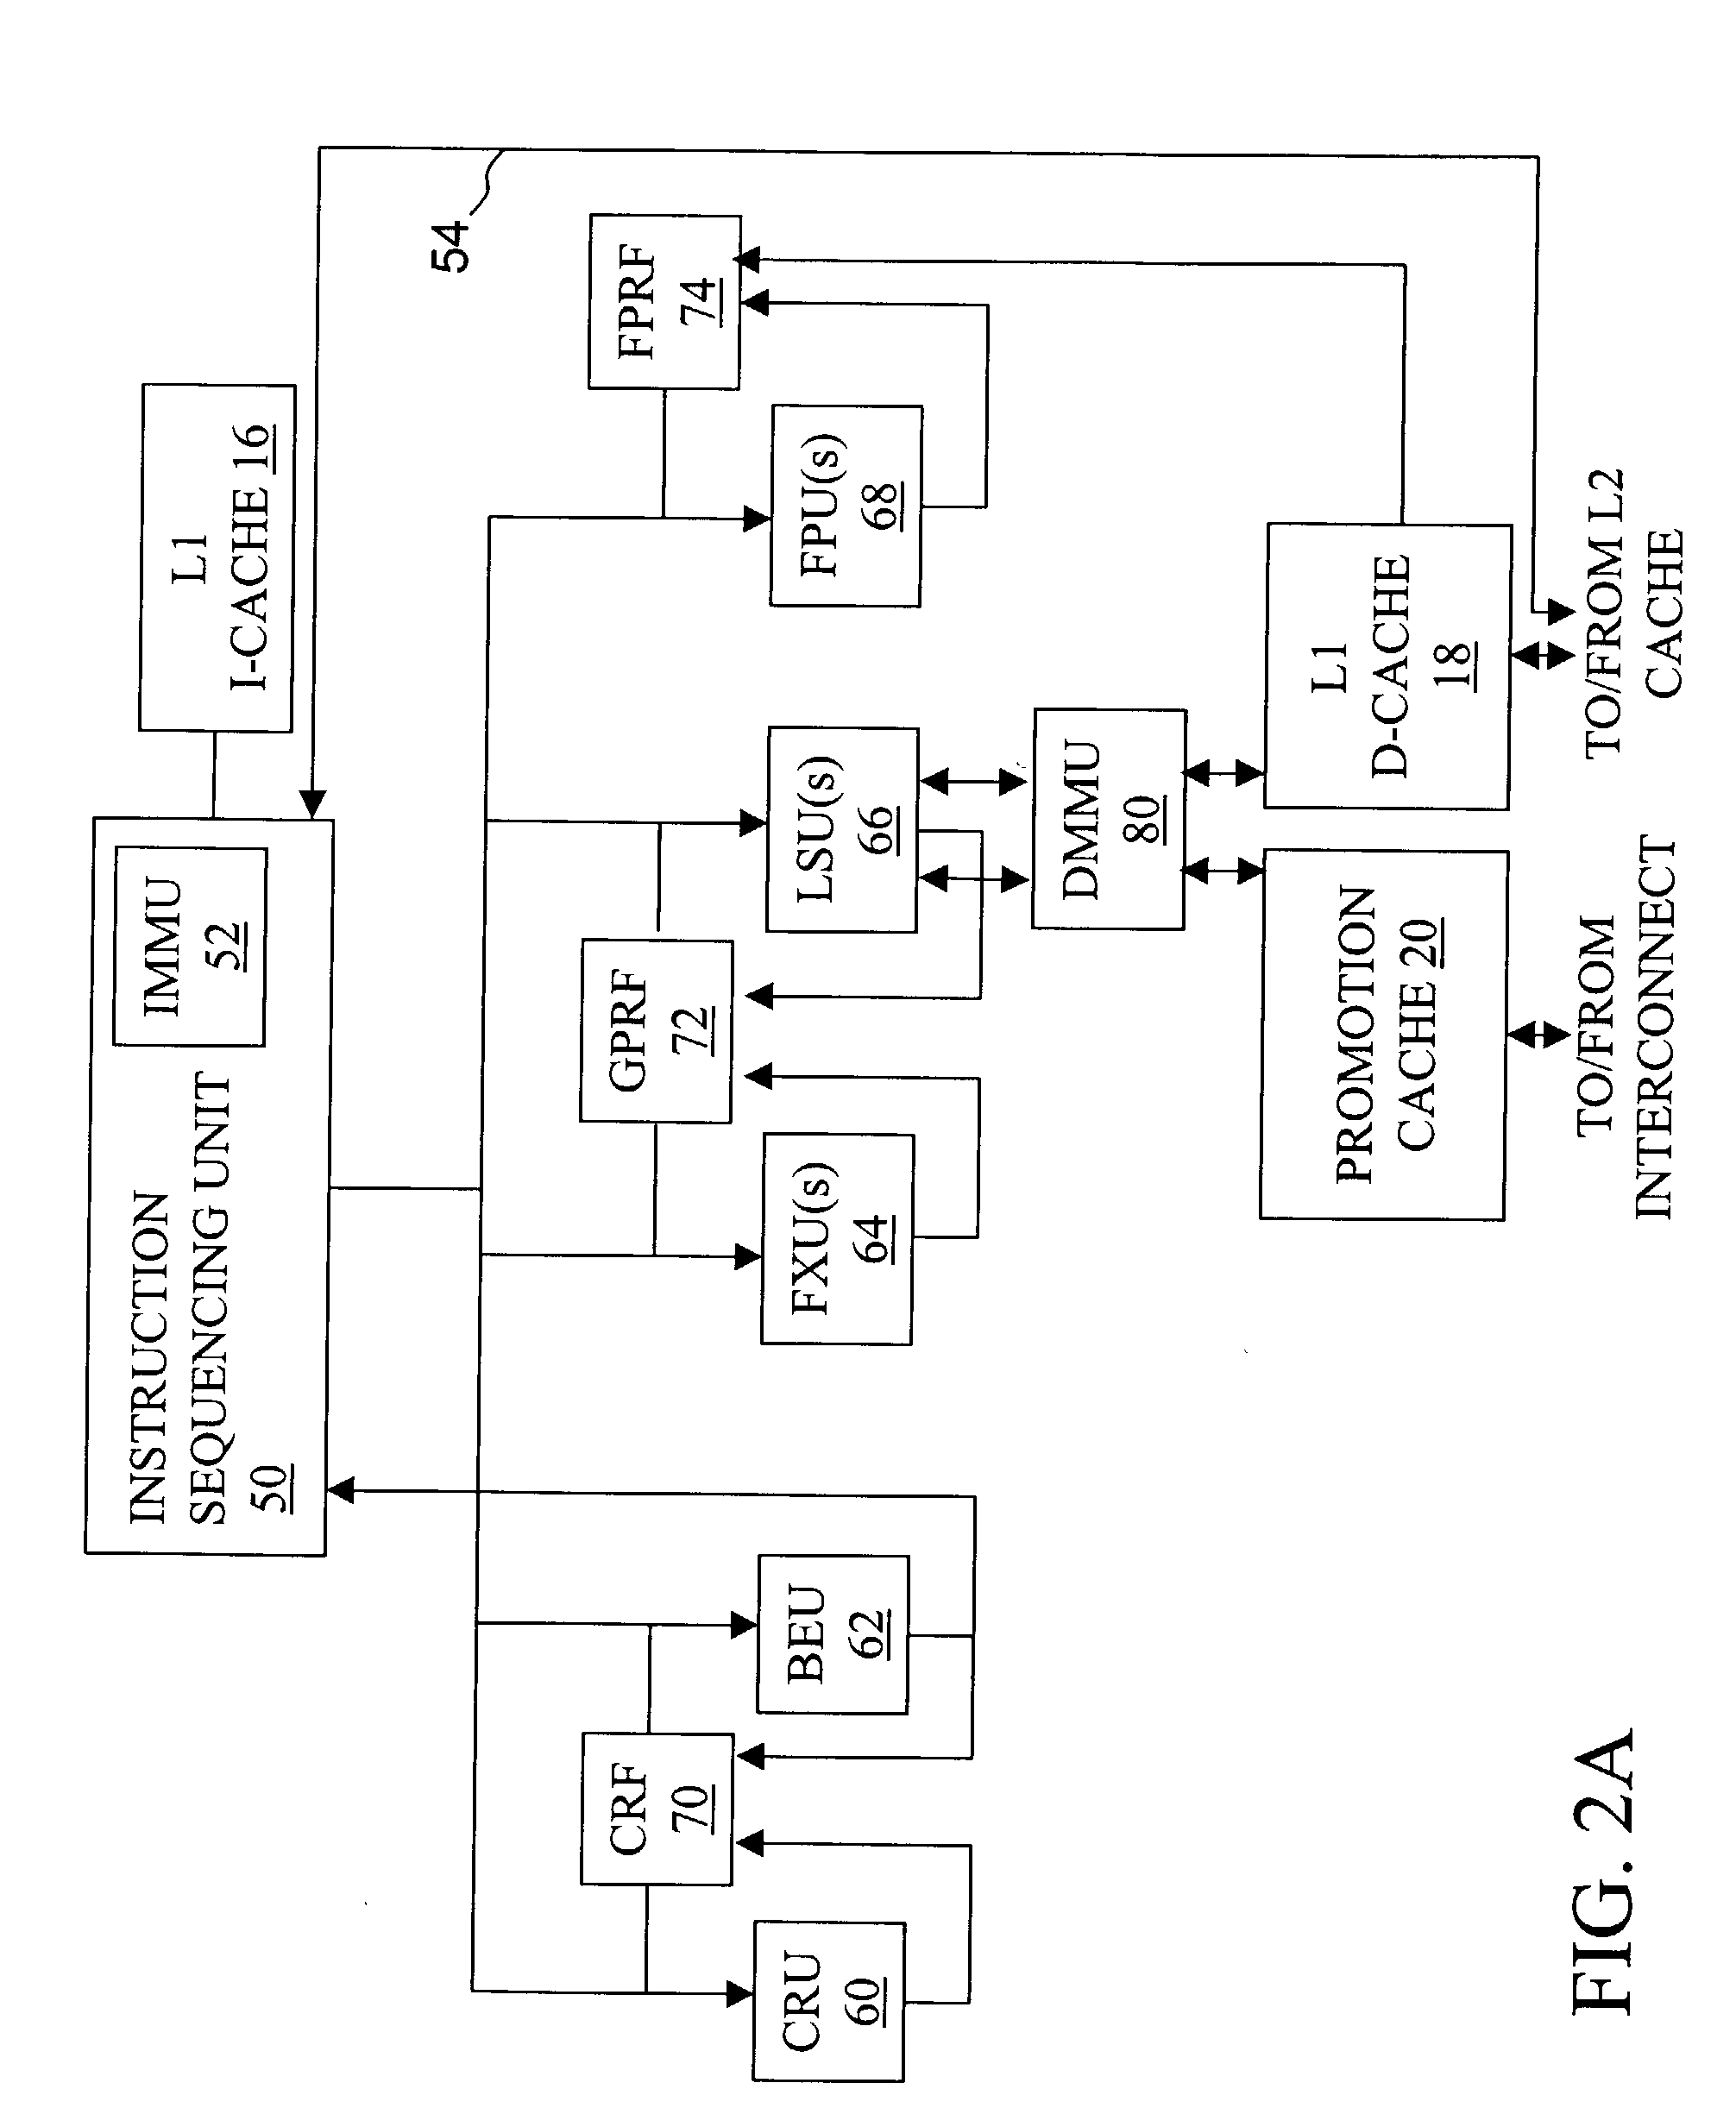 High speed promotion mechanism suitable for lock acquisition in a multiprocessor data processing system